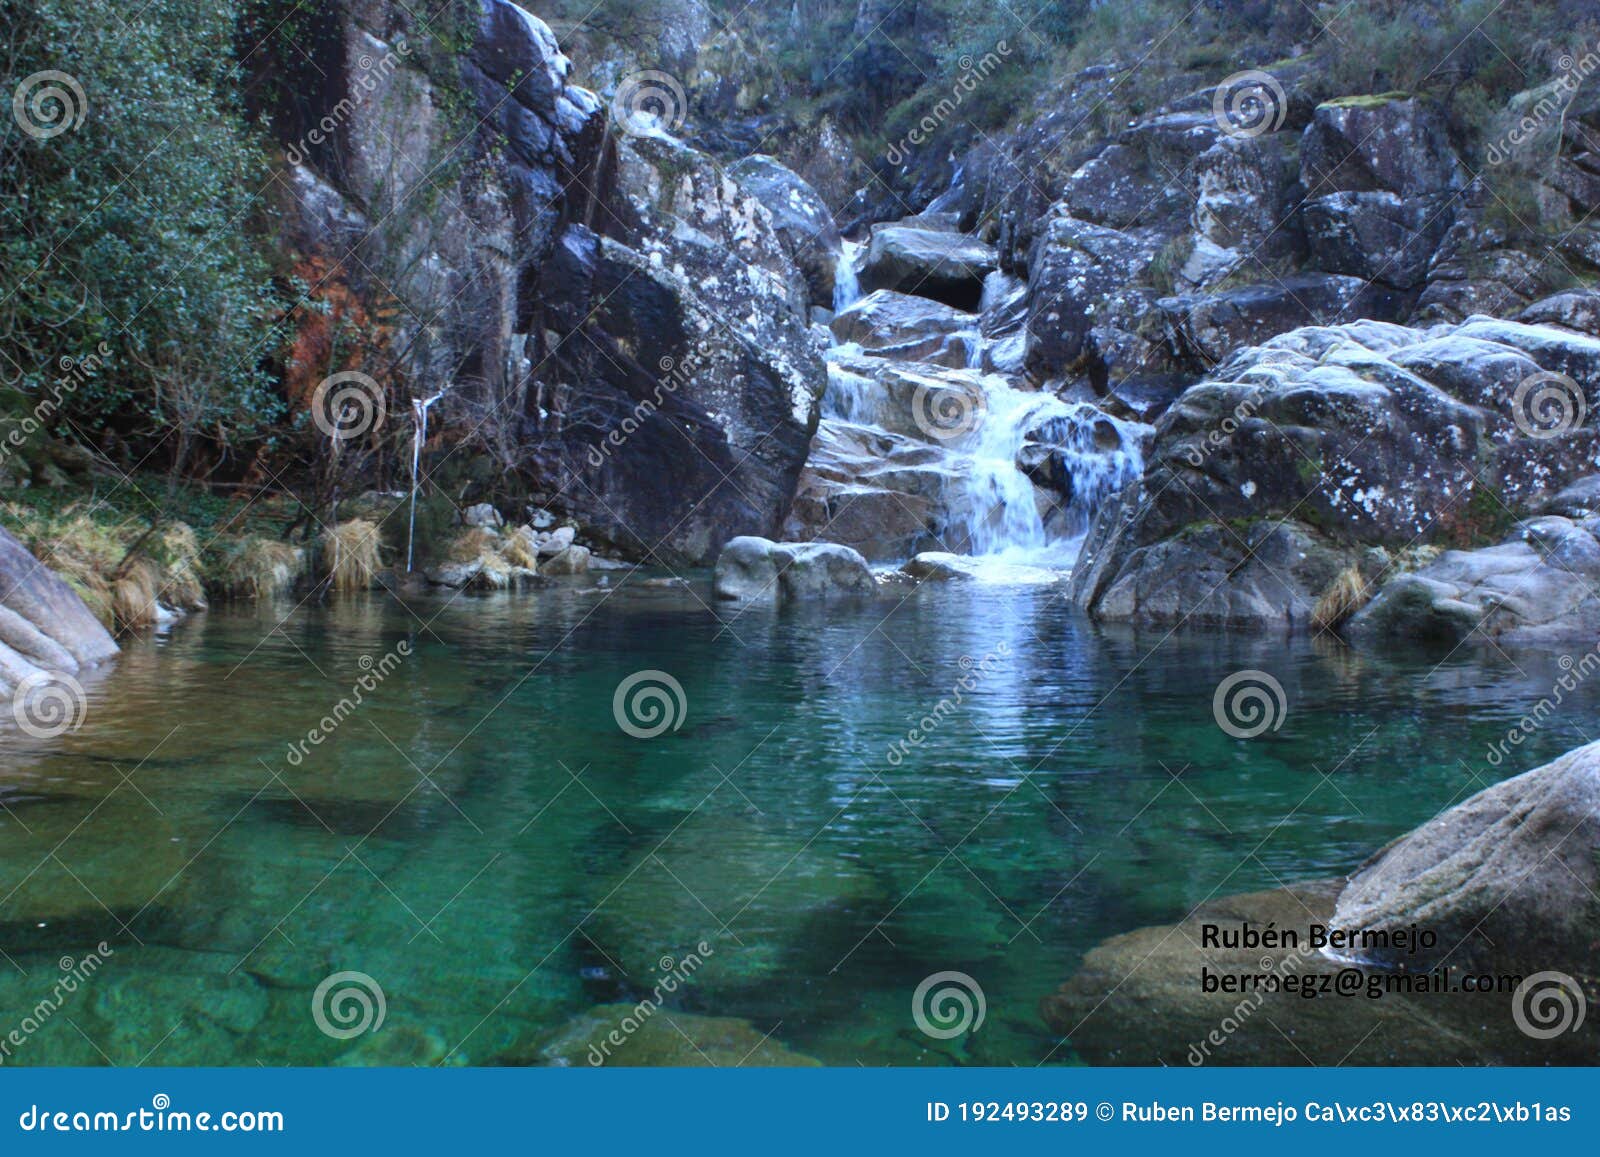 beautiful view of a crystal clear water natural pool with the turquoise green background and rocks. corga de fecha, lobios